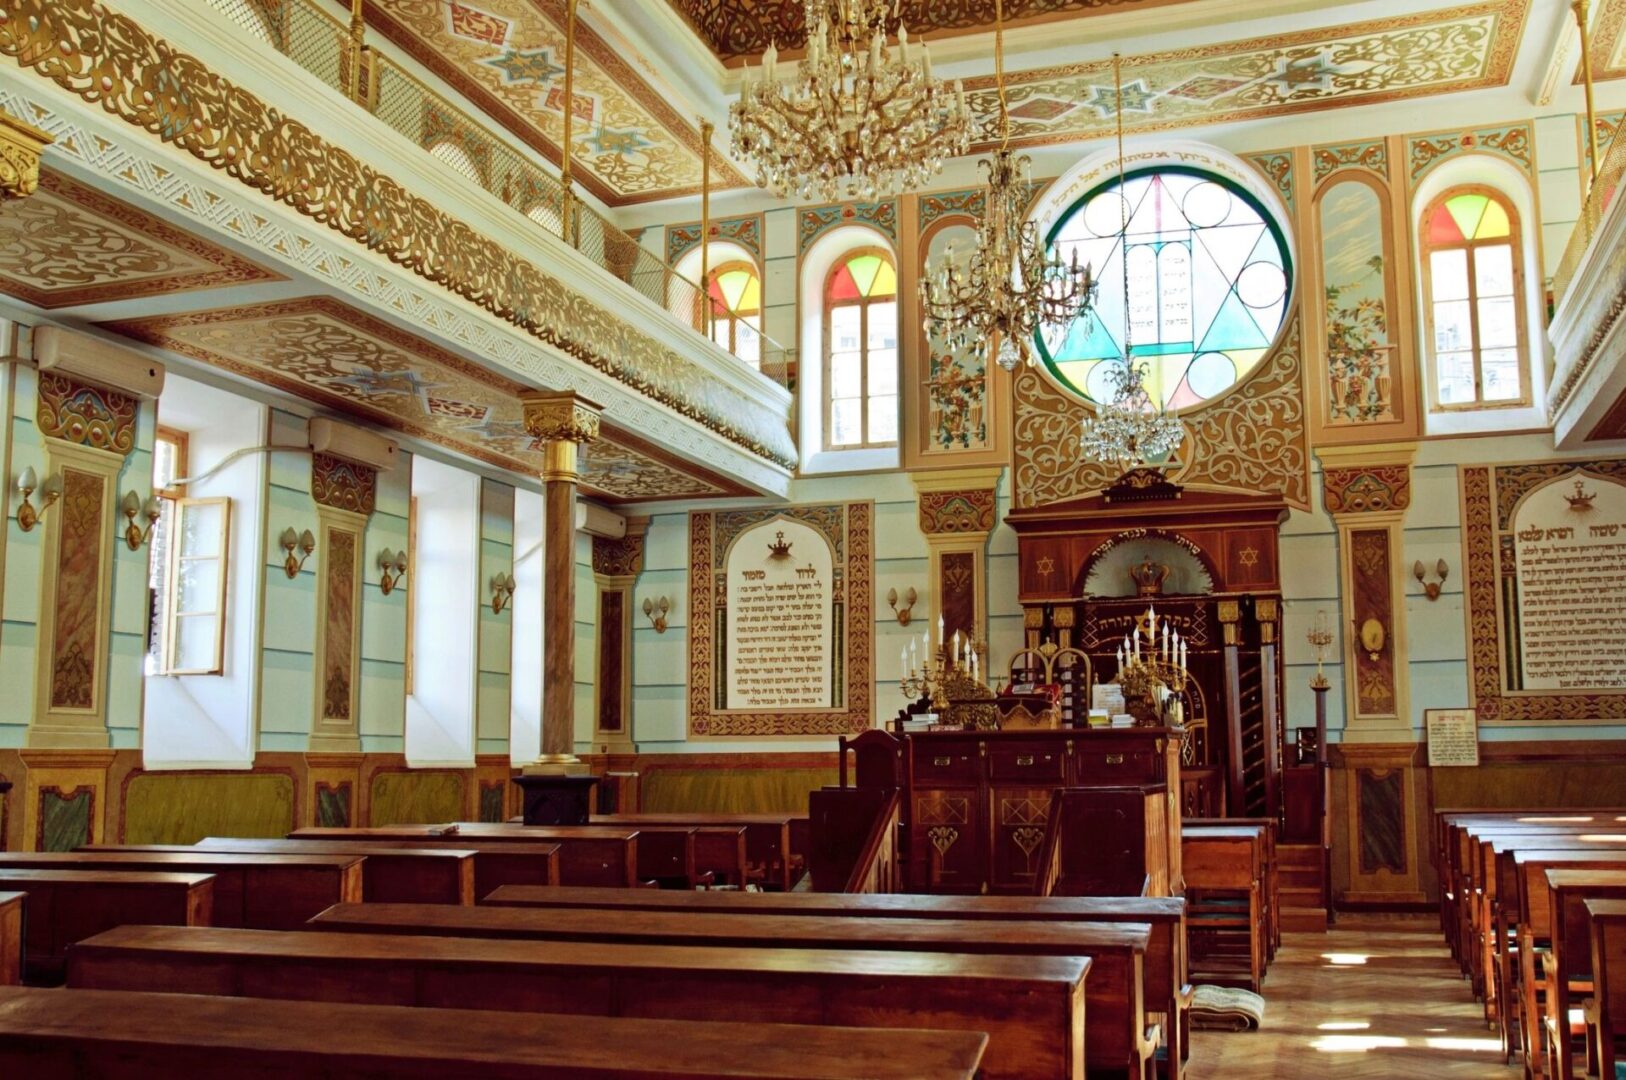 A church with pews and stained glass windows.